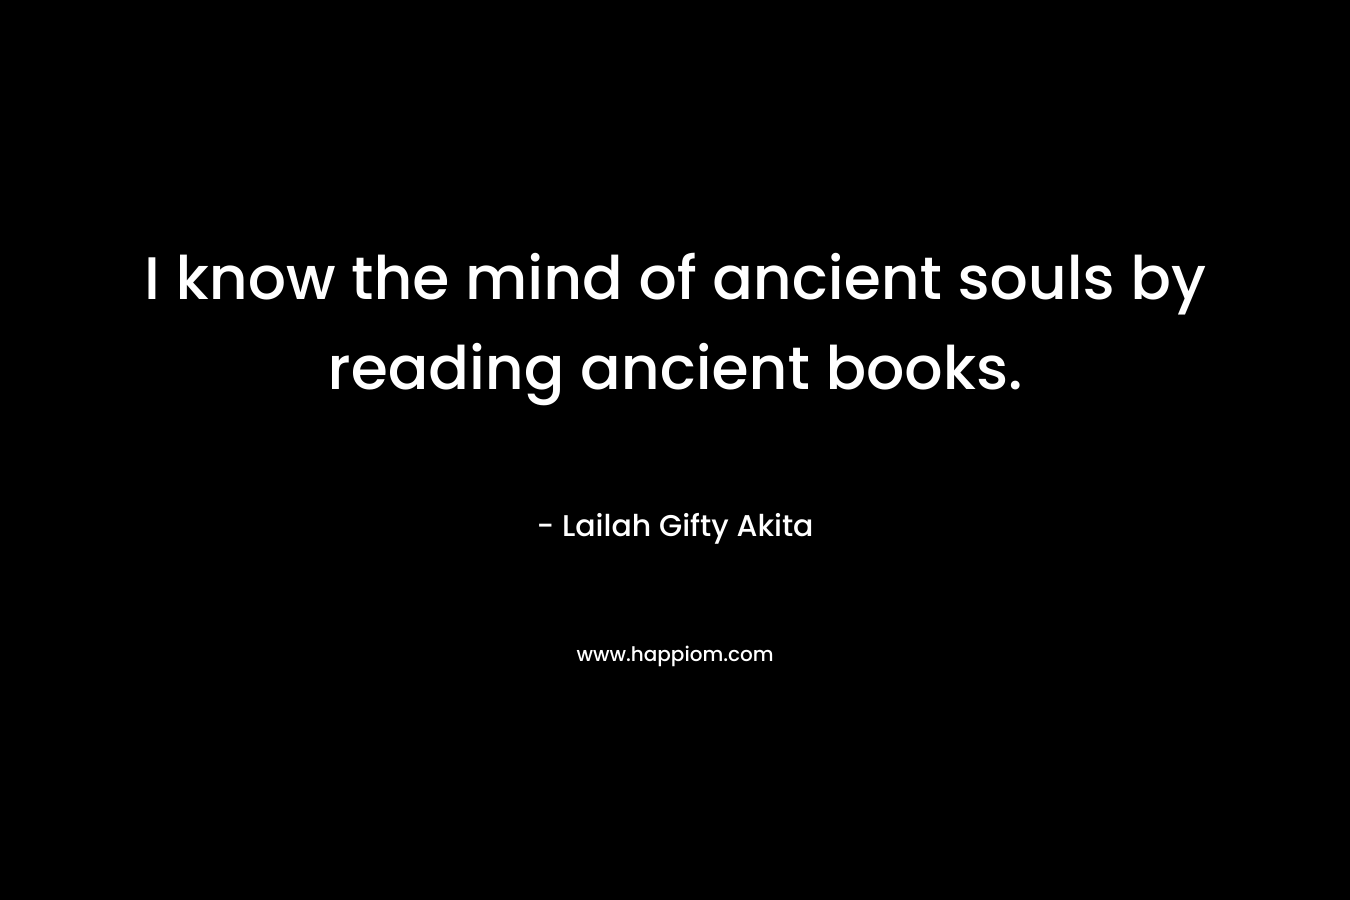 I know the mind of ancient souls by reading ancient books.